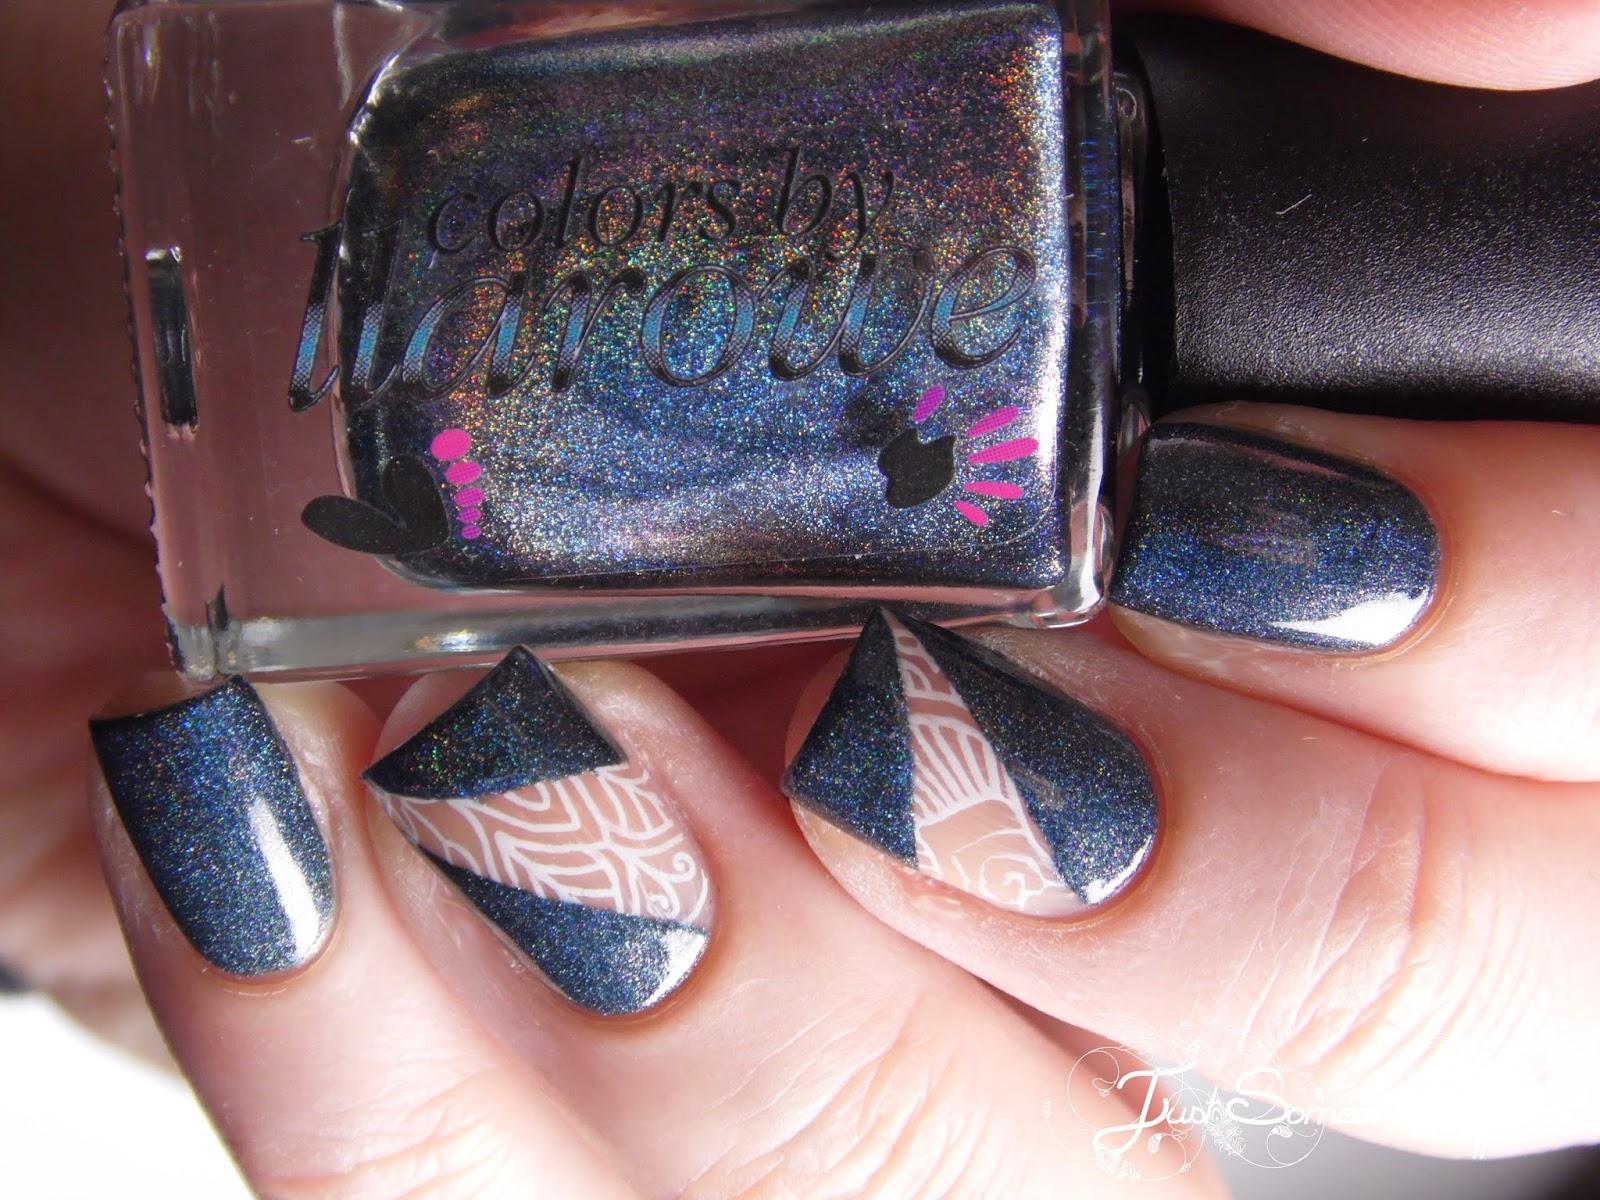 Strip Tease ongulaire - Negative Space Nail Art